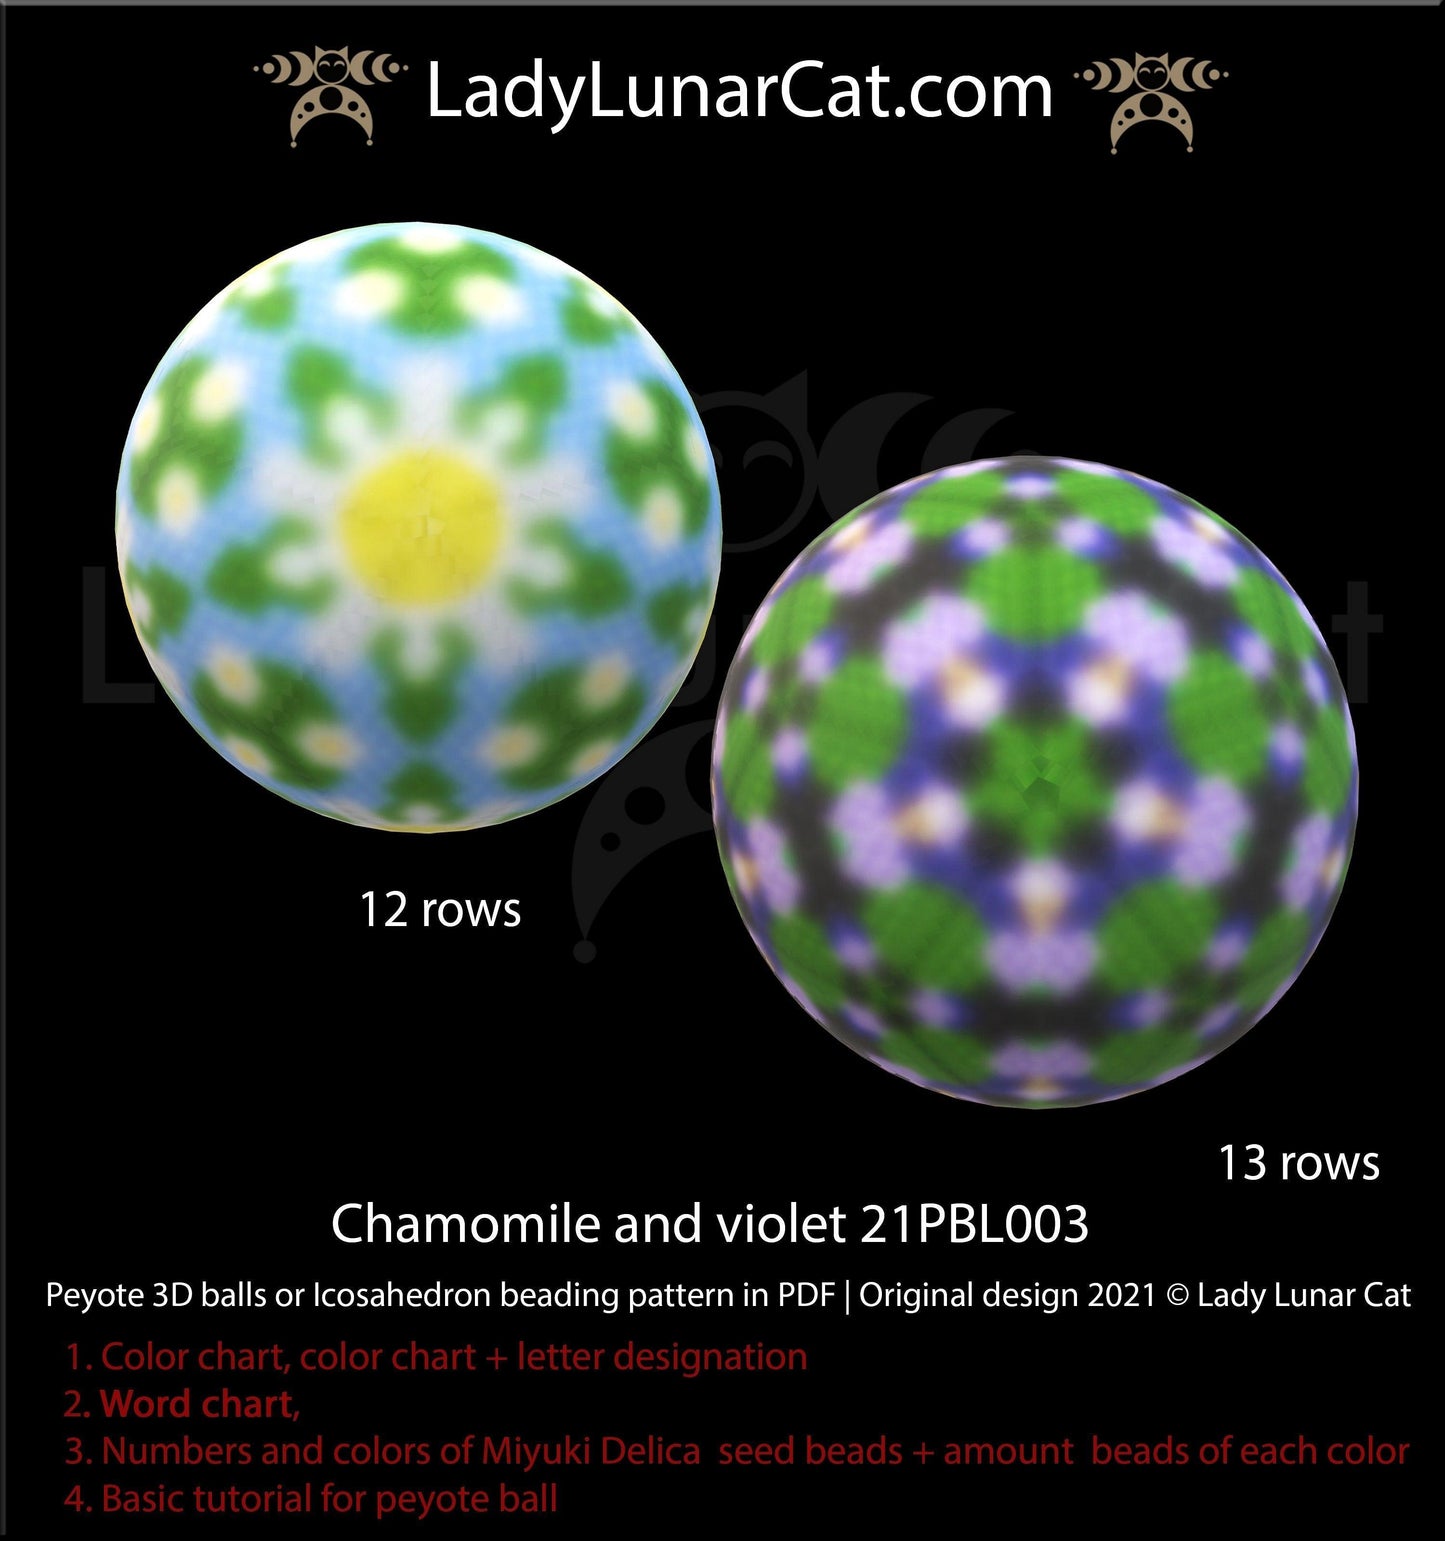 Copy of Peyote 3d ball pattern for beading | Beaded Icosahedron Spring flowers 21PBL004 10 and 9 rows LadyLunarCat